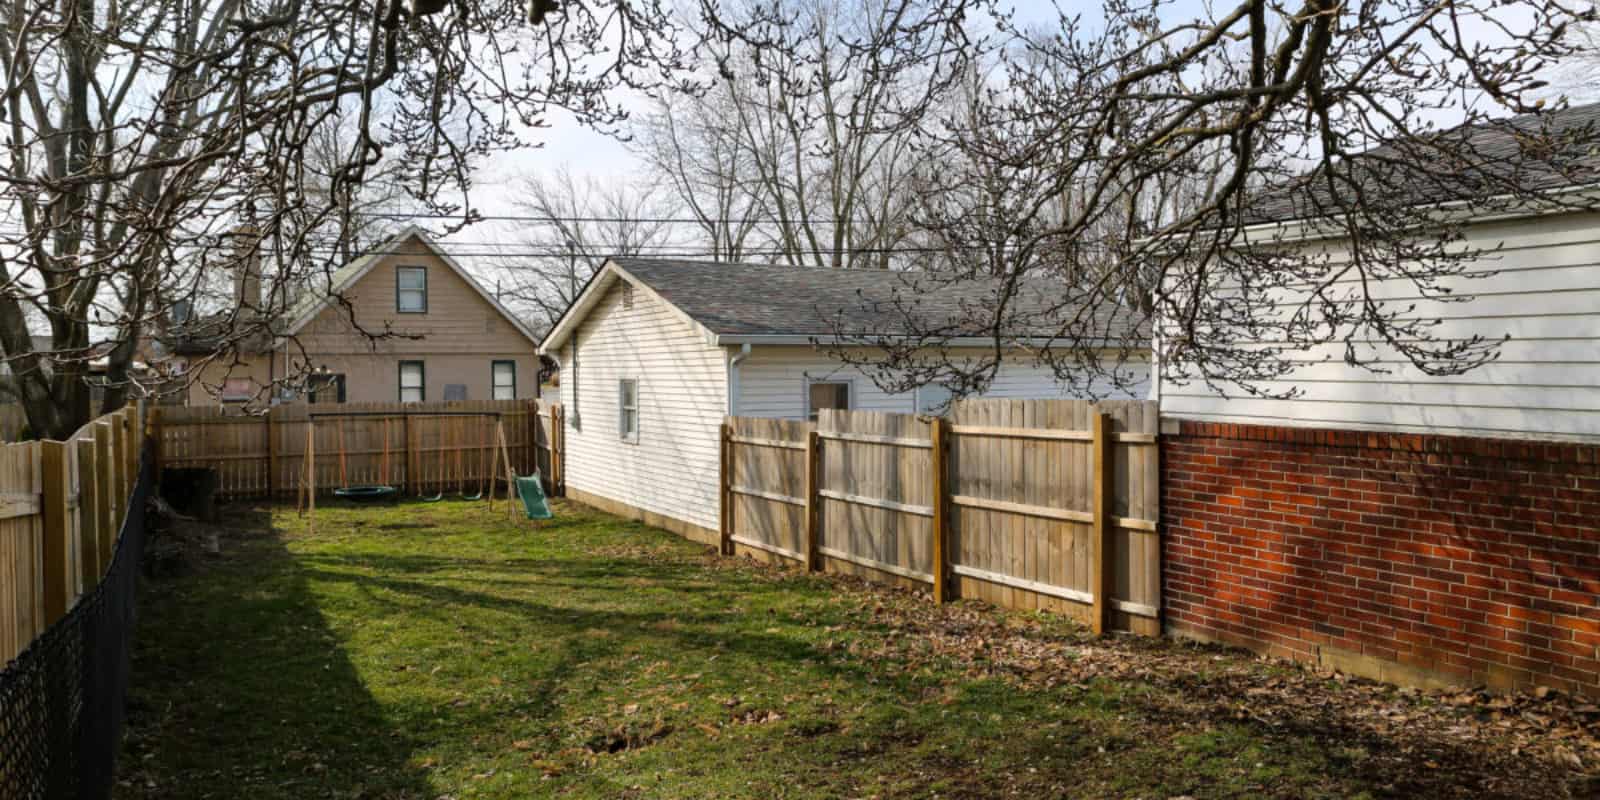 4 Bedroom 2.5 Bath For Sale with In Law Quarters and Private Fenced in Yard - 1009 E. Columbus Street Martinsville, IN 46151 - MSD Martinsville School District - Danielle Stiles Real Estate-23